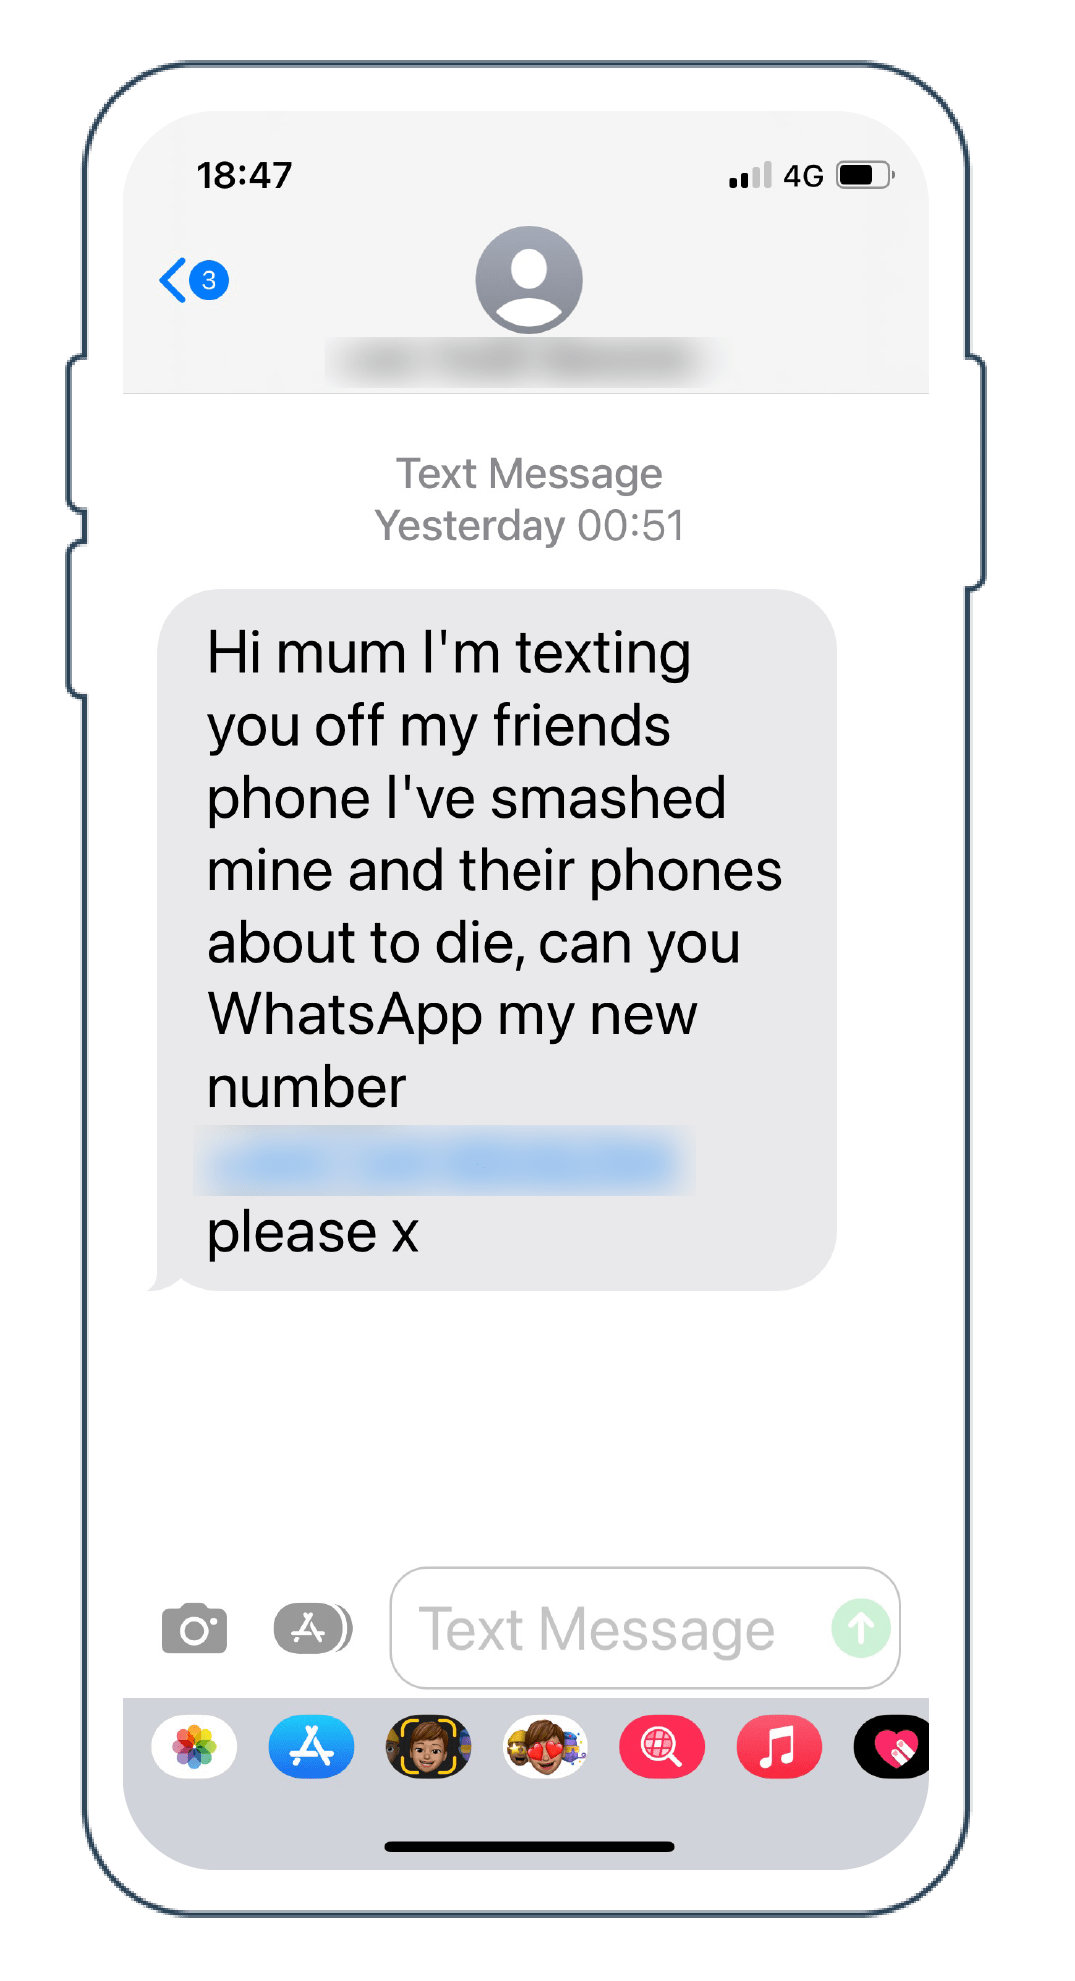 scam text message asking for mum to message their WhatsApp